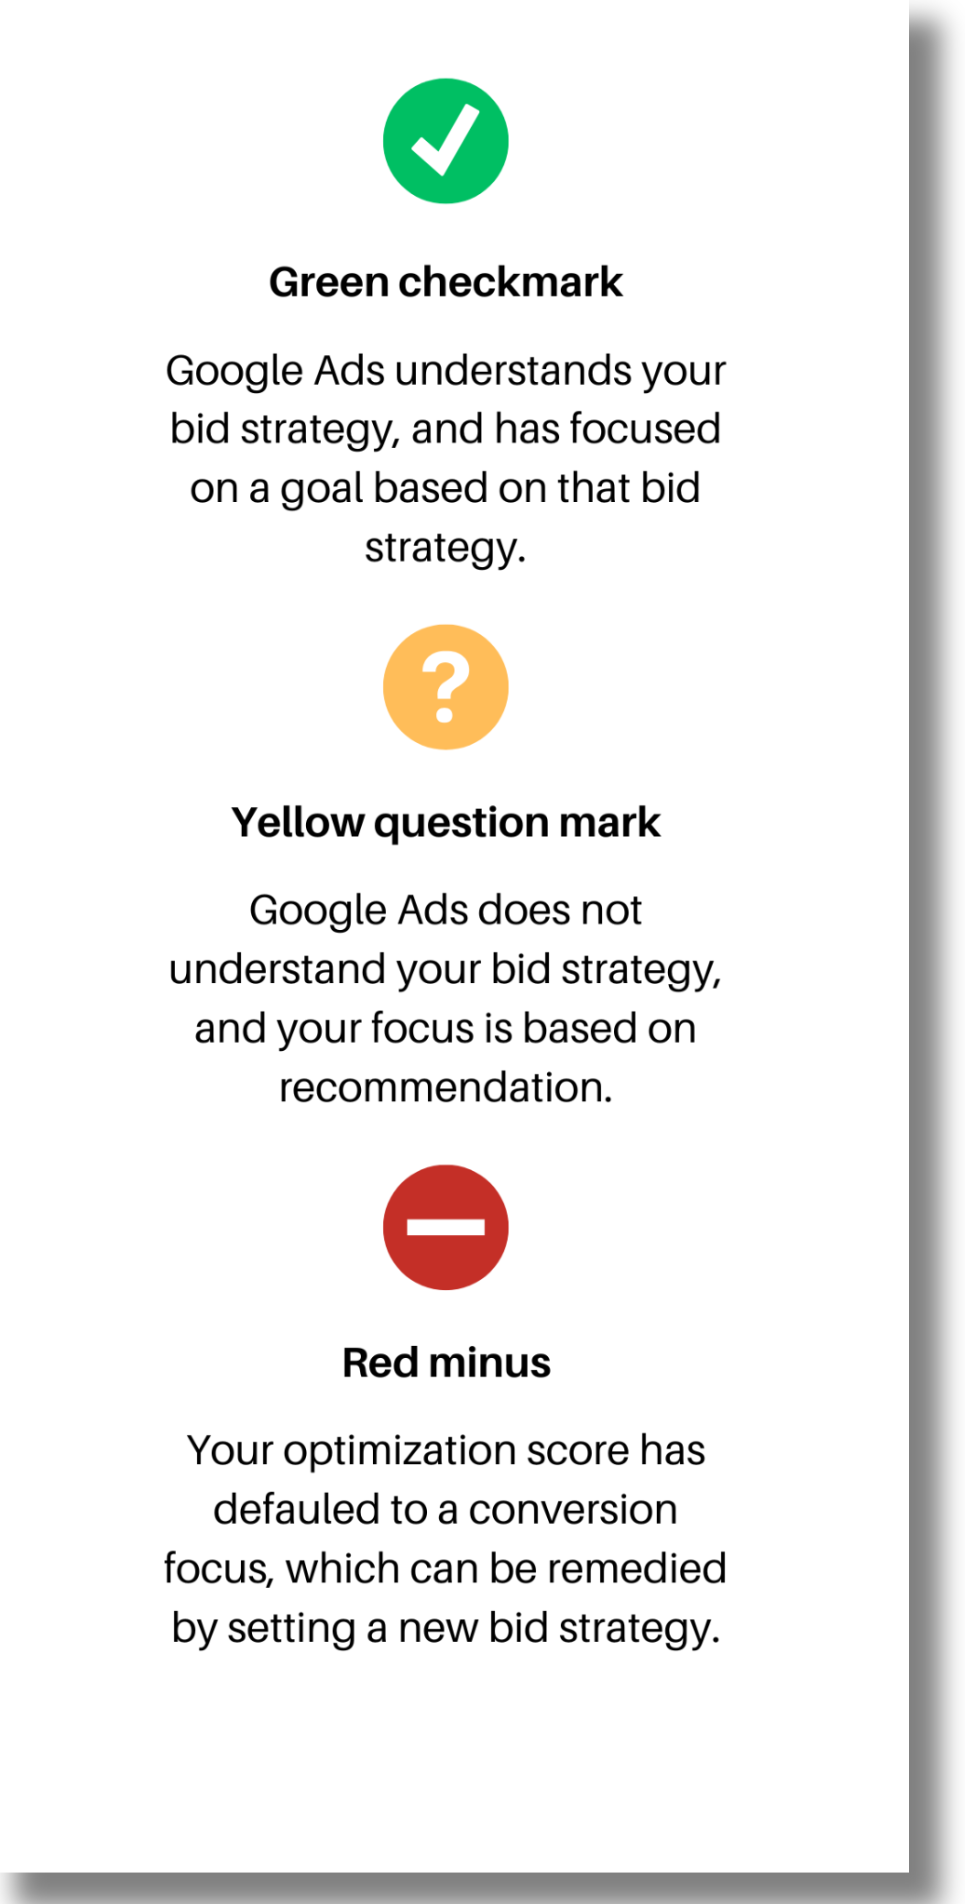 Google Ads optimization legend. Arranged vertically, a green checkmark, yellow question mark and red minus sign. Indicating success, confusion and a need to set a new strategy respectively.